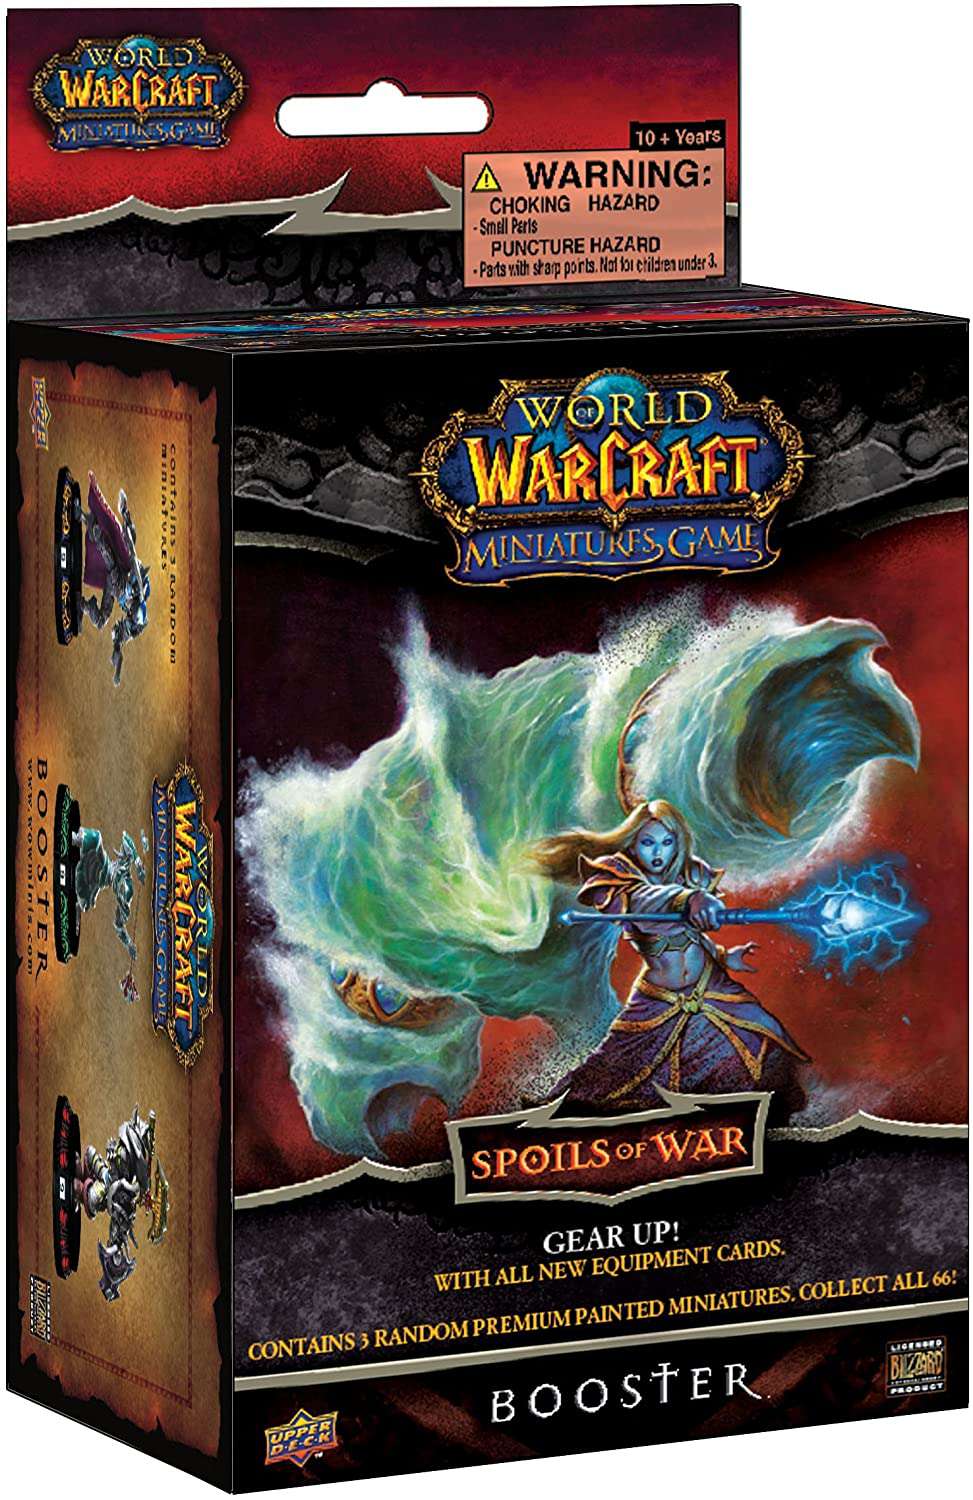 World of Warcraft Miniatures Game Spoils of War Booster Pack - image 1 of 2